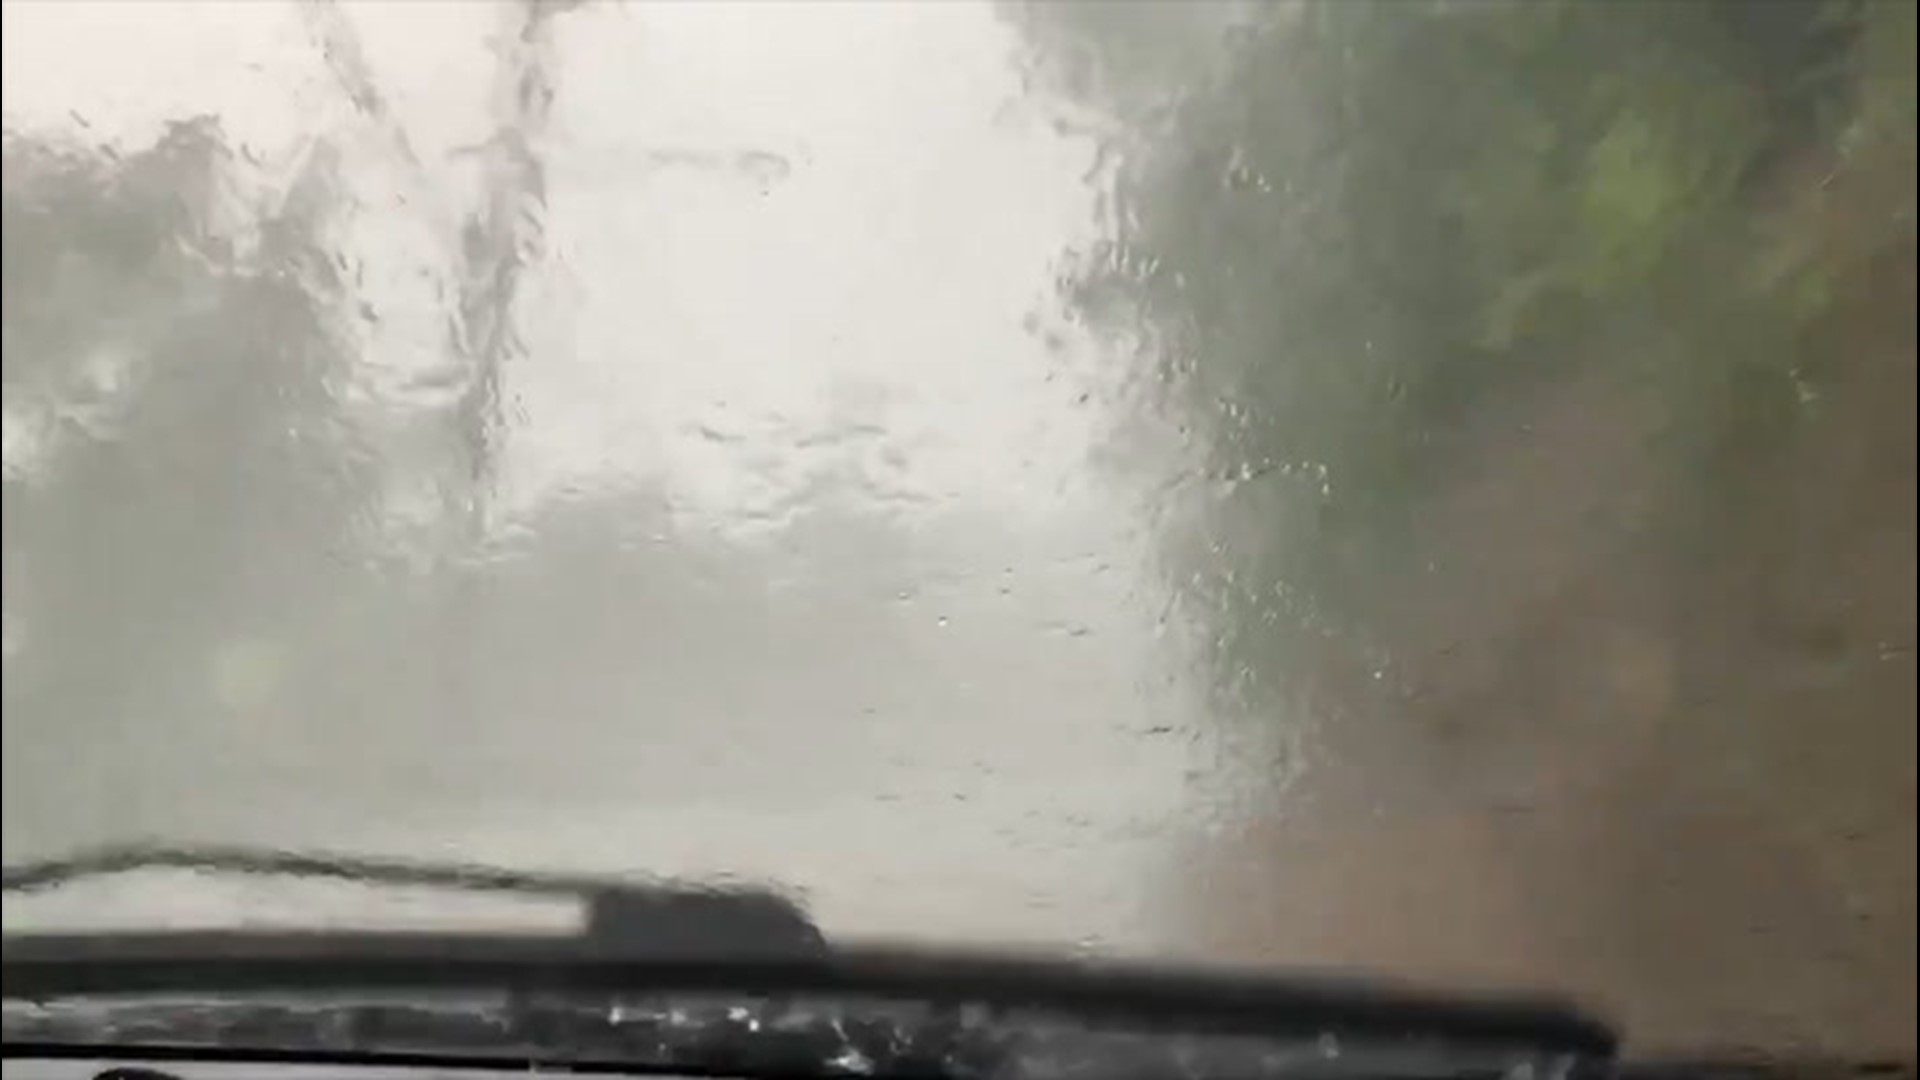 Driving in Midland, Pennsylvania, proved difficult on May 29 as a downpour of hail and rain slammed into the town.